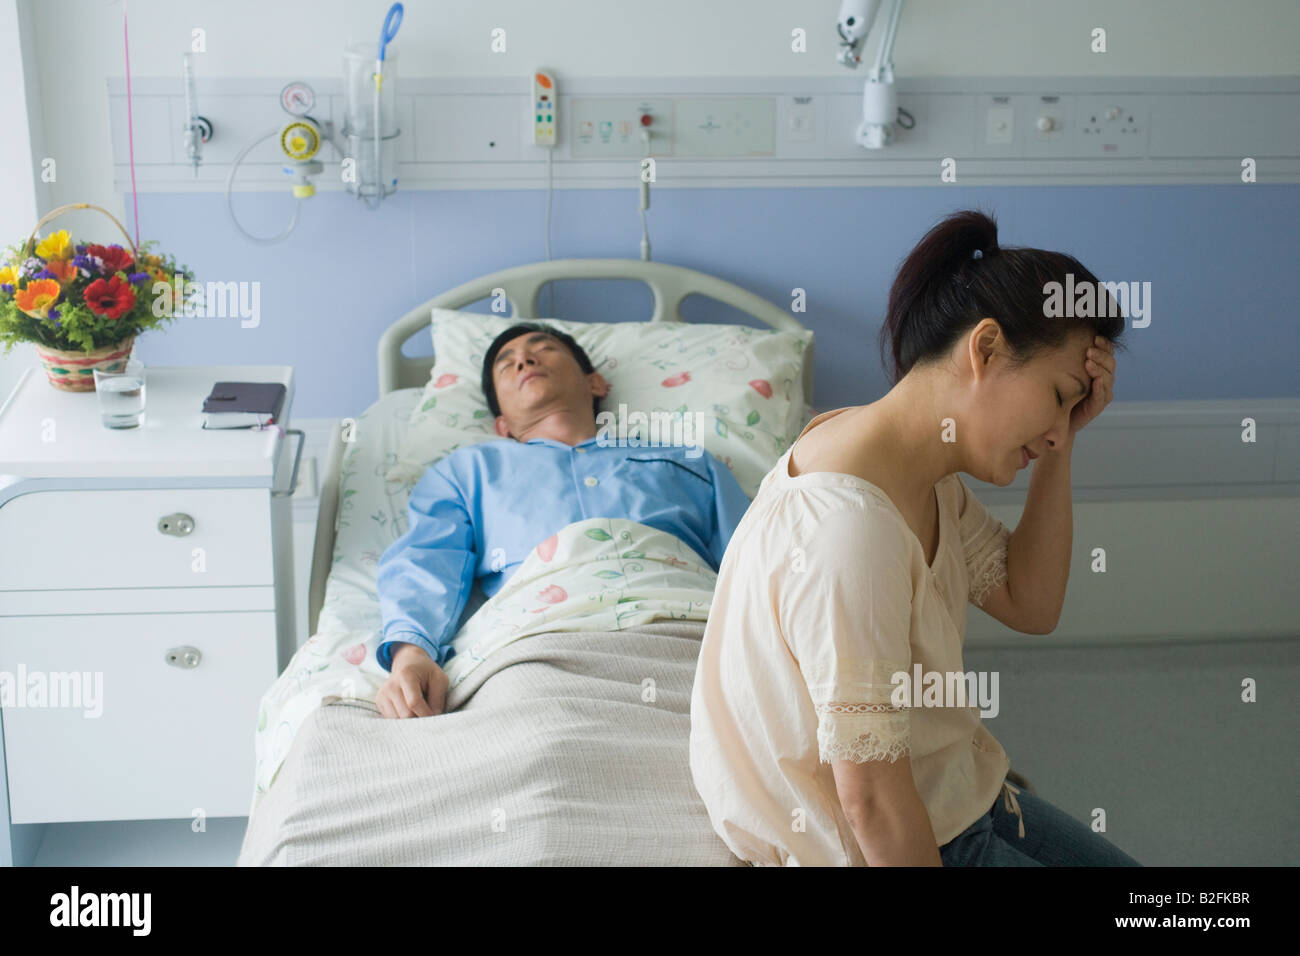 Mid adult man sleeping on the bed and a mid adult woman looking sad in a hospital room Stock Photo